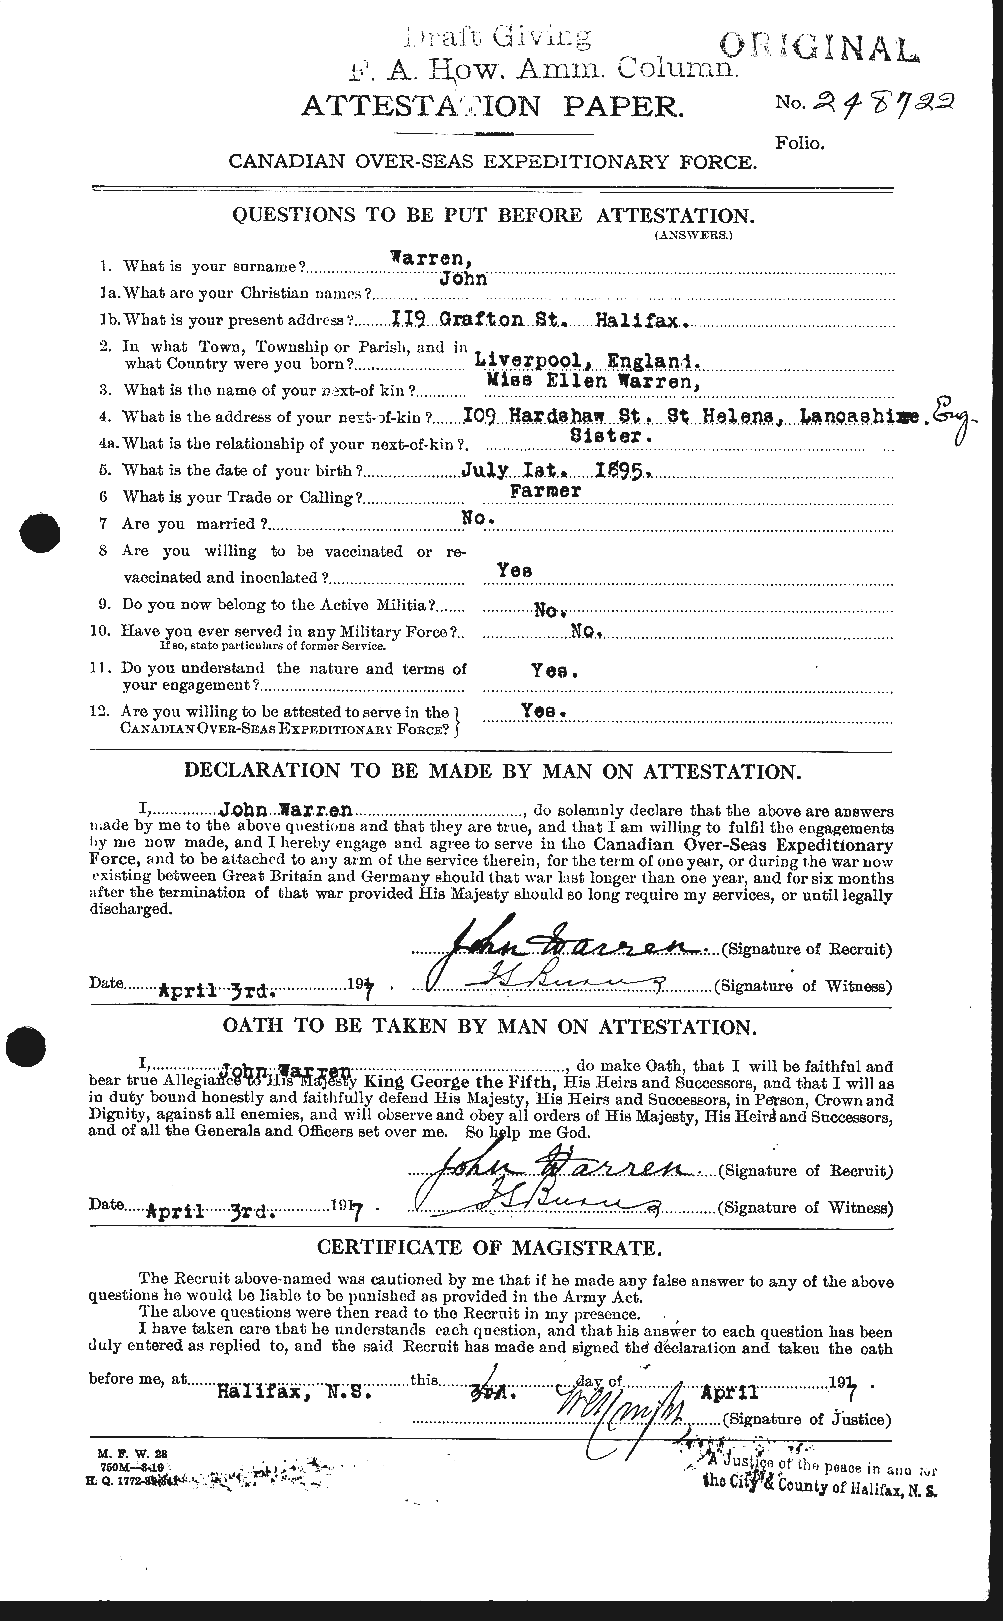 Personnel Records of the First World War - CEF 658544a